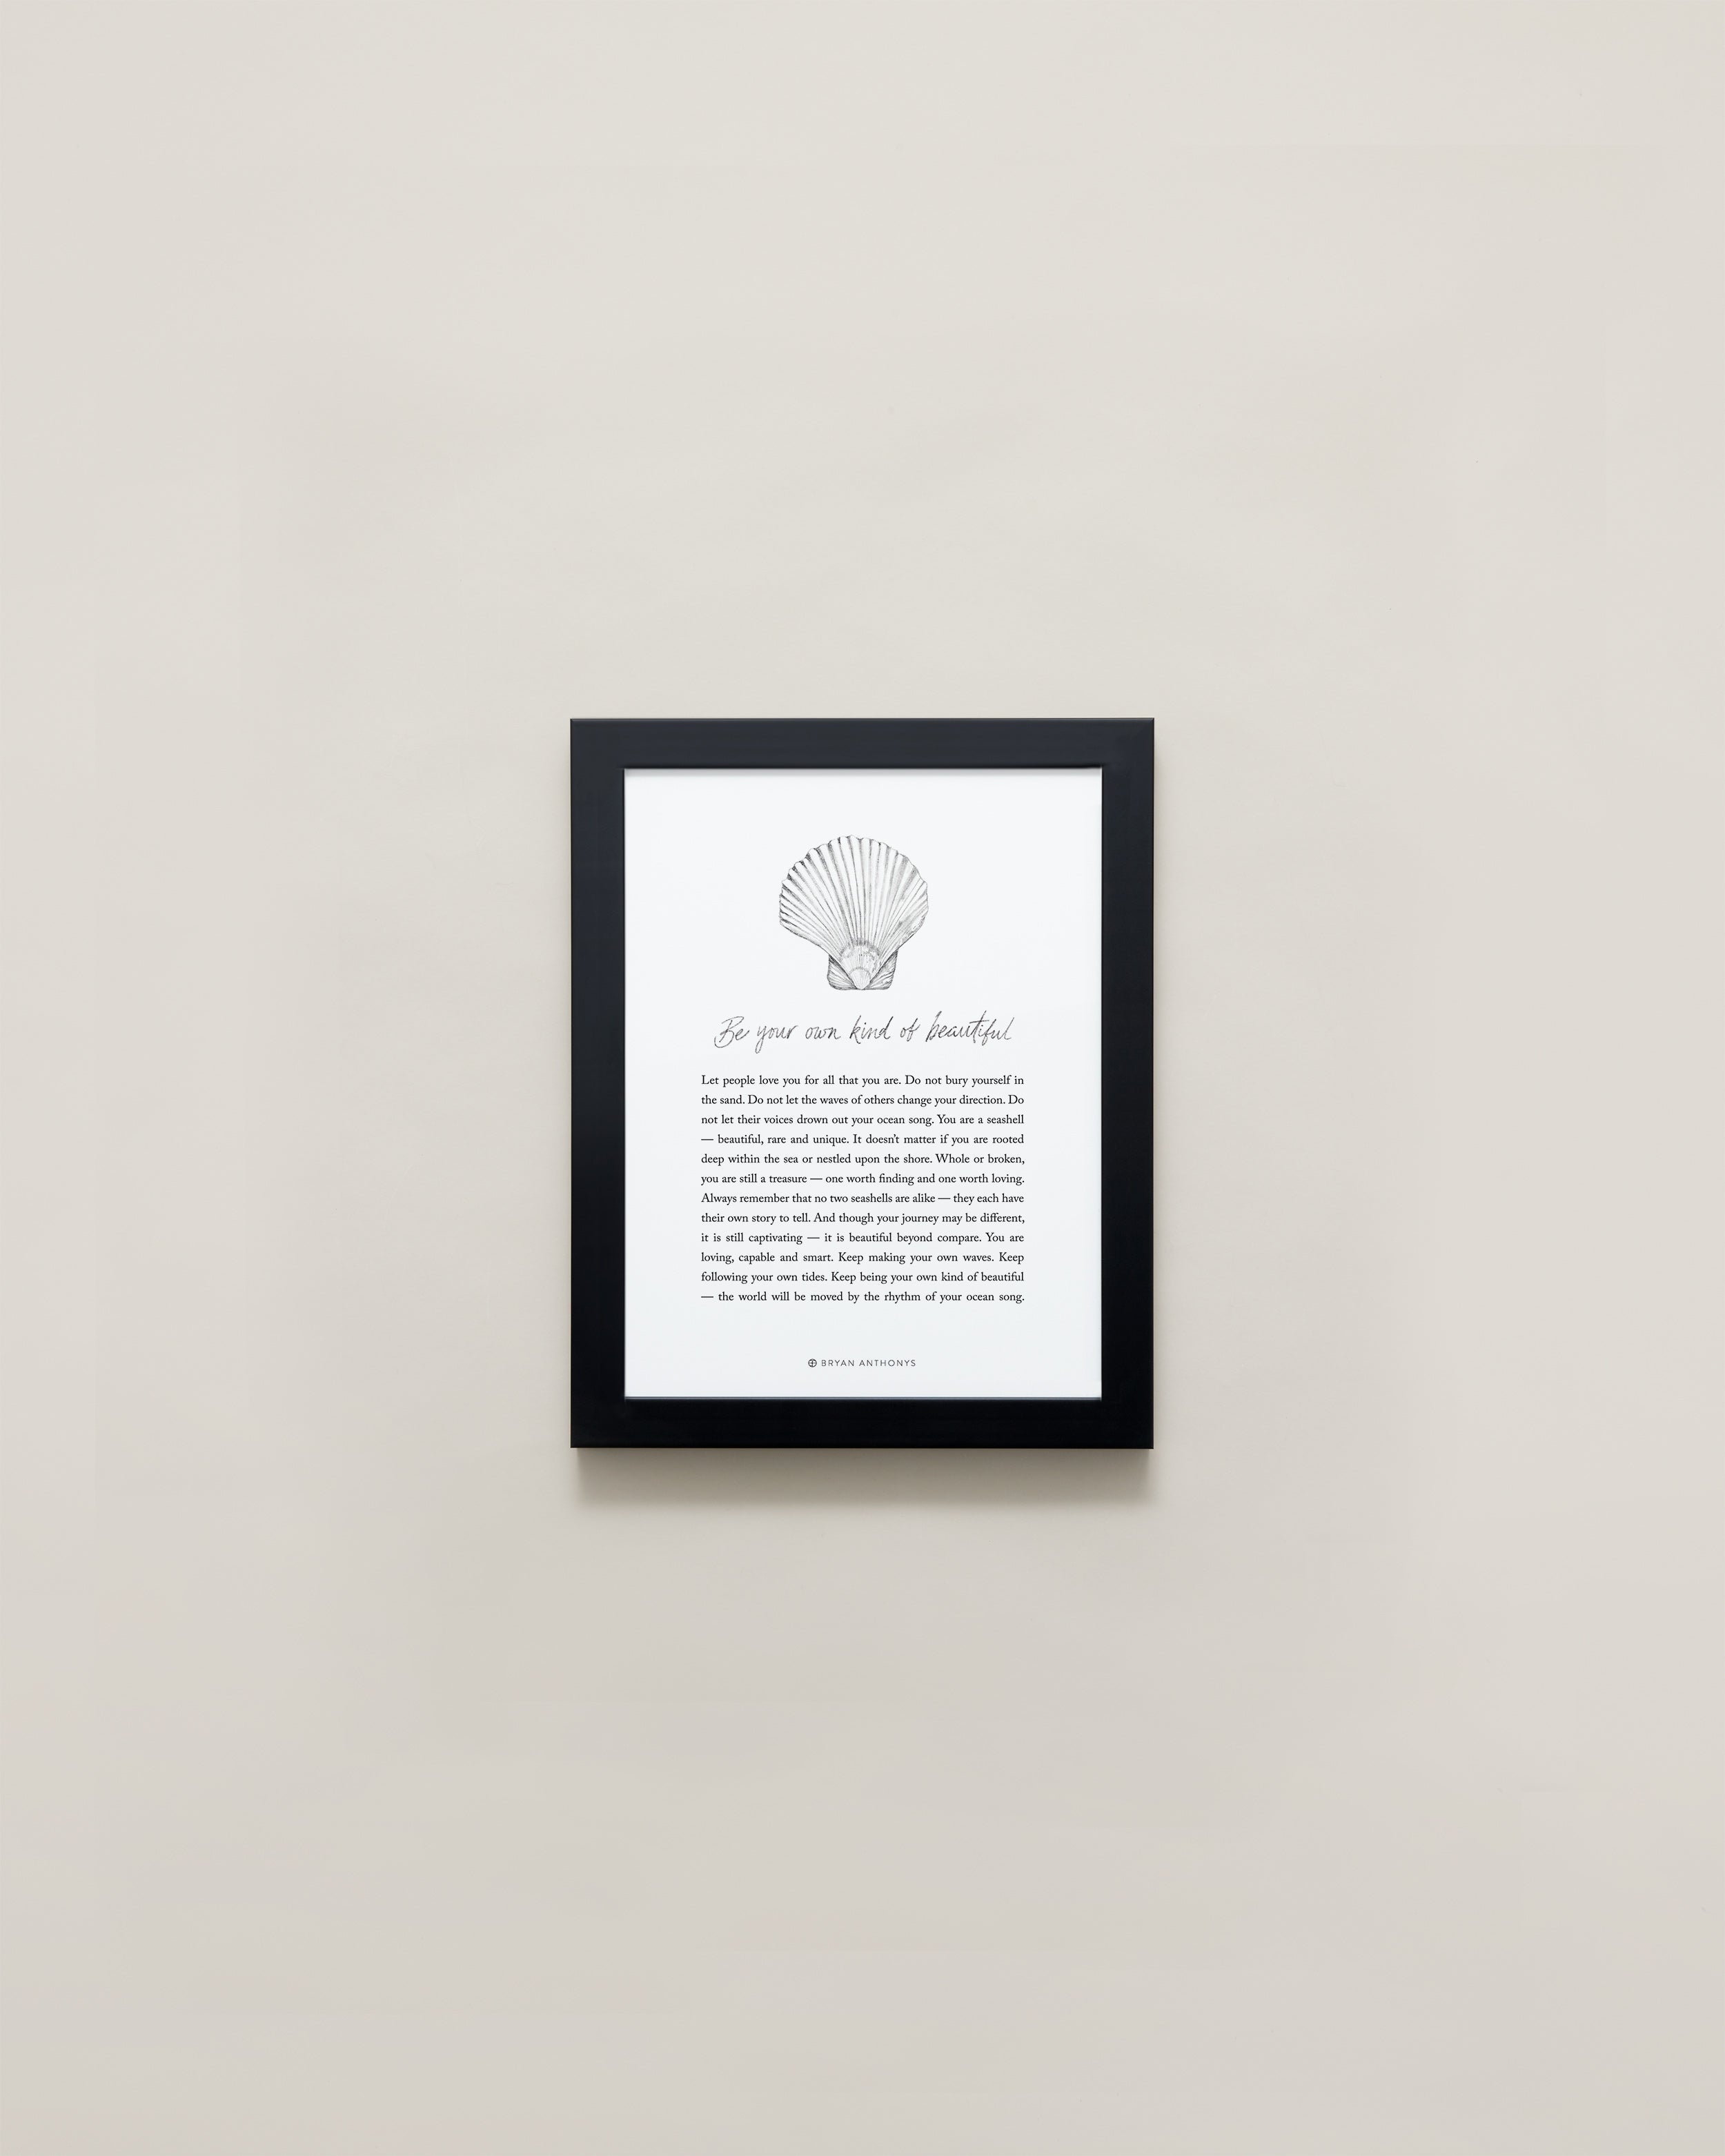 Bryan Anthonys Home Decor Be Your Own Kind Of Beautiful Illustration with Meaning 5x7 Graphic Framed Print Black